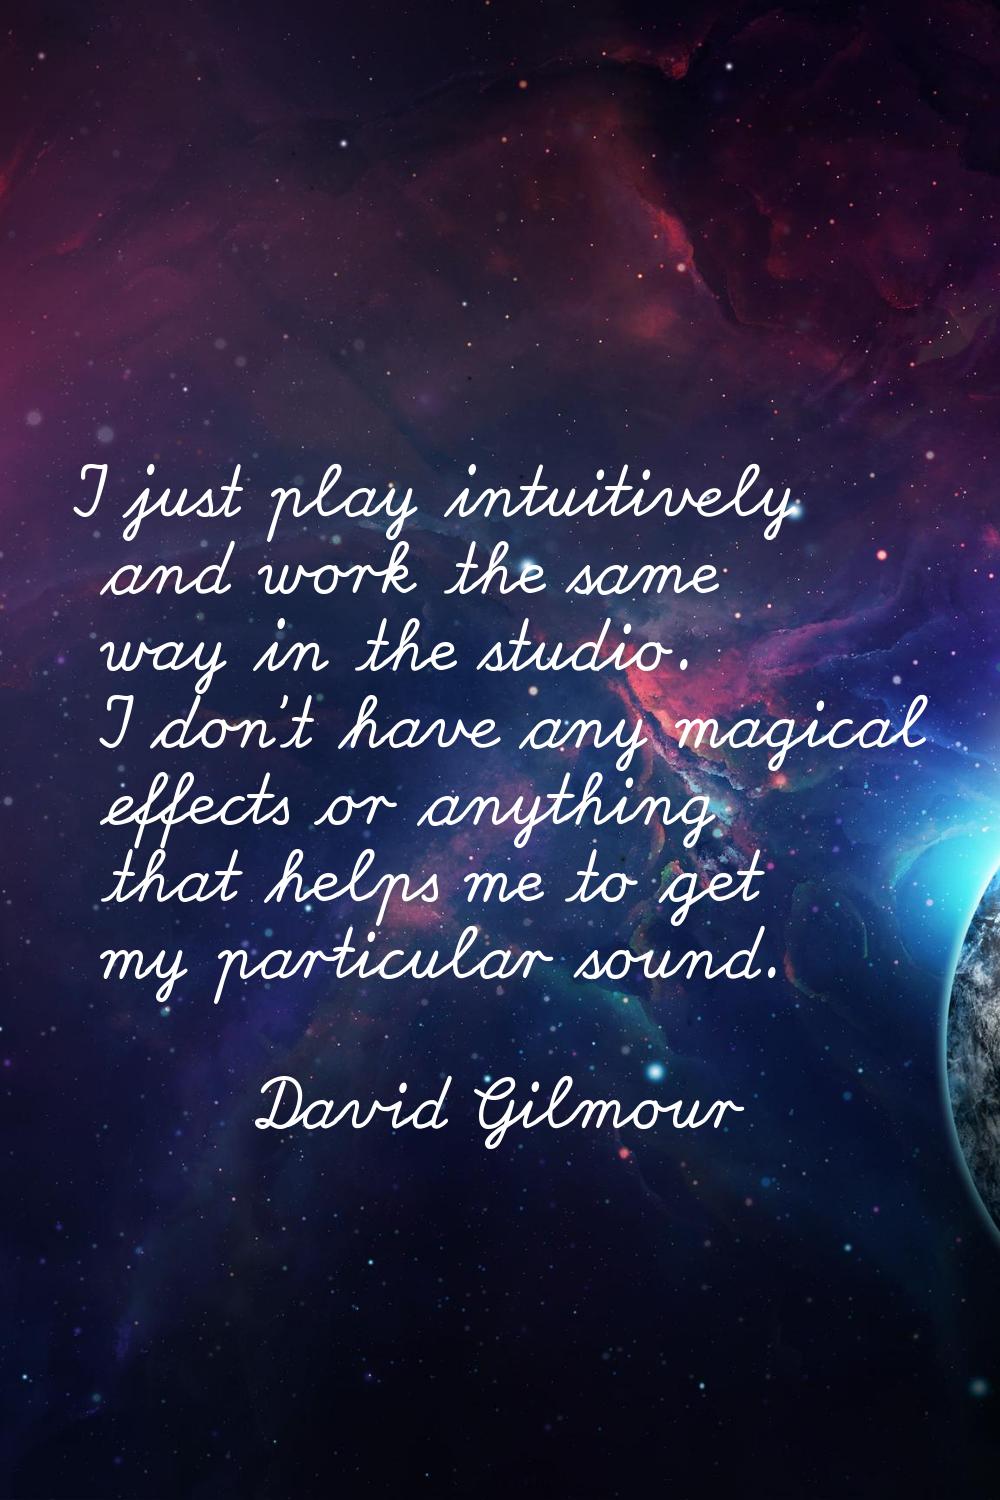 I just play intuitively and work the same way in the studio. I don't have any magical effects or an